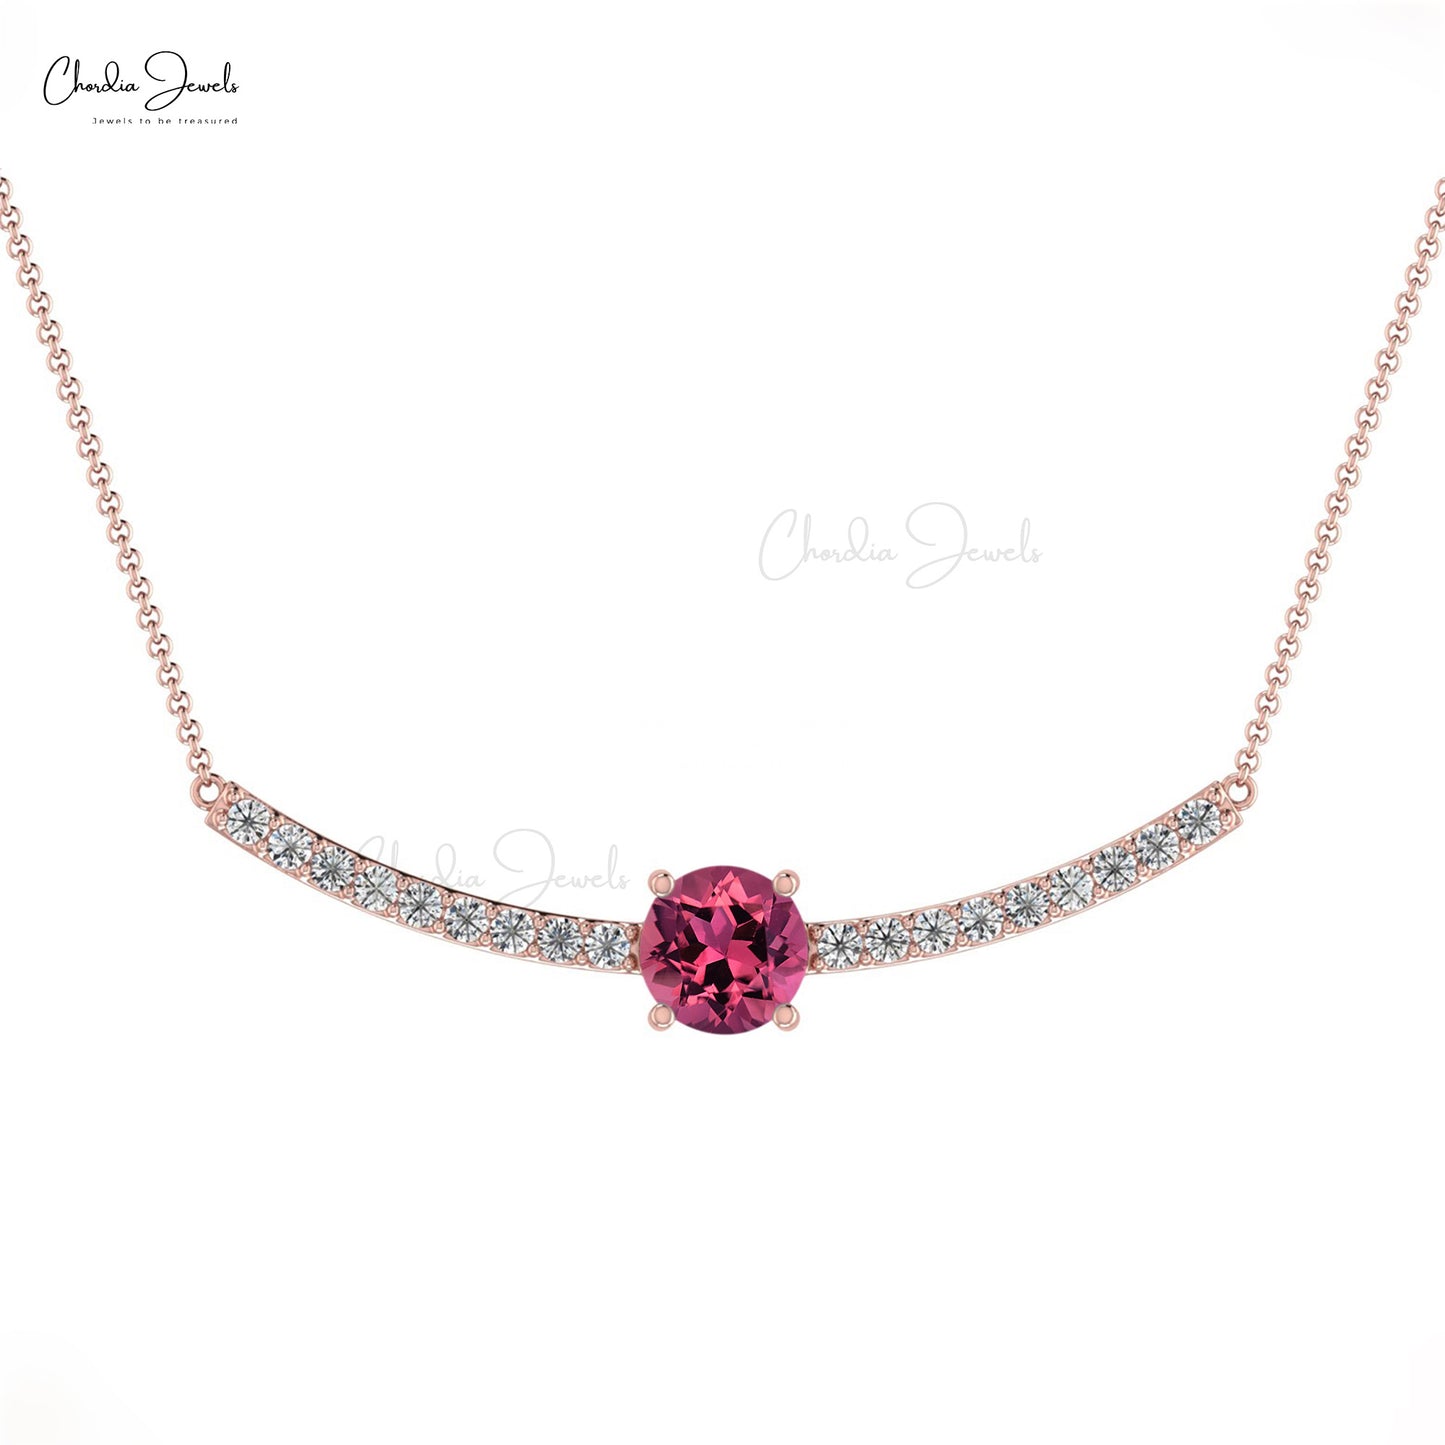 Natural Pink Tourmaline and Diamond Necklace, 5mm Round Faceted October Birthstone Necklace, 14k Solid Gold Necklace Gift for Wedding